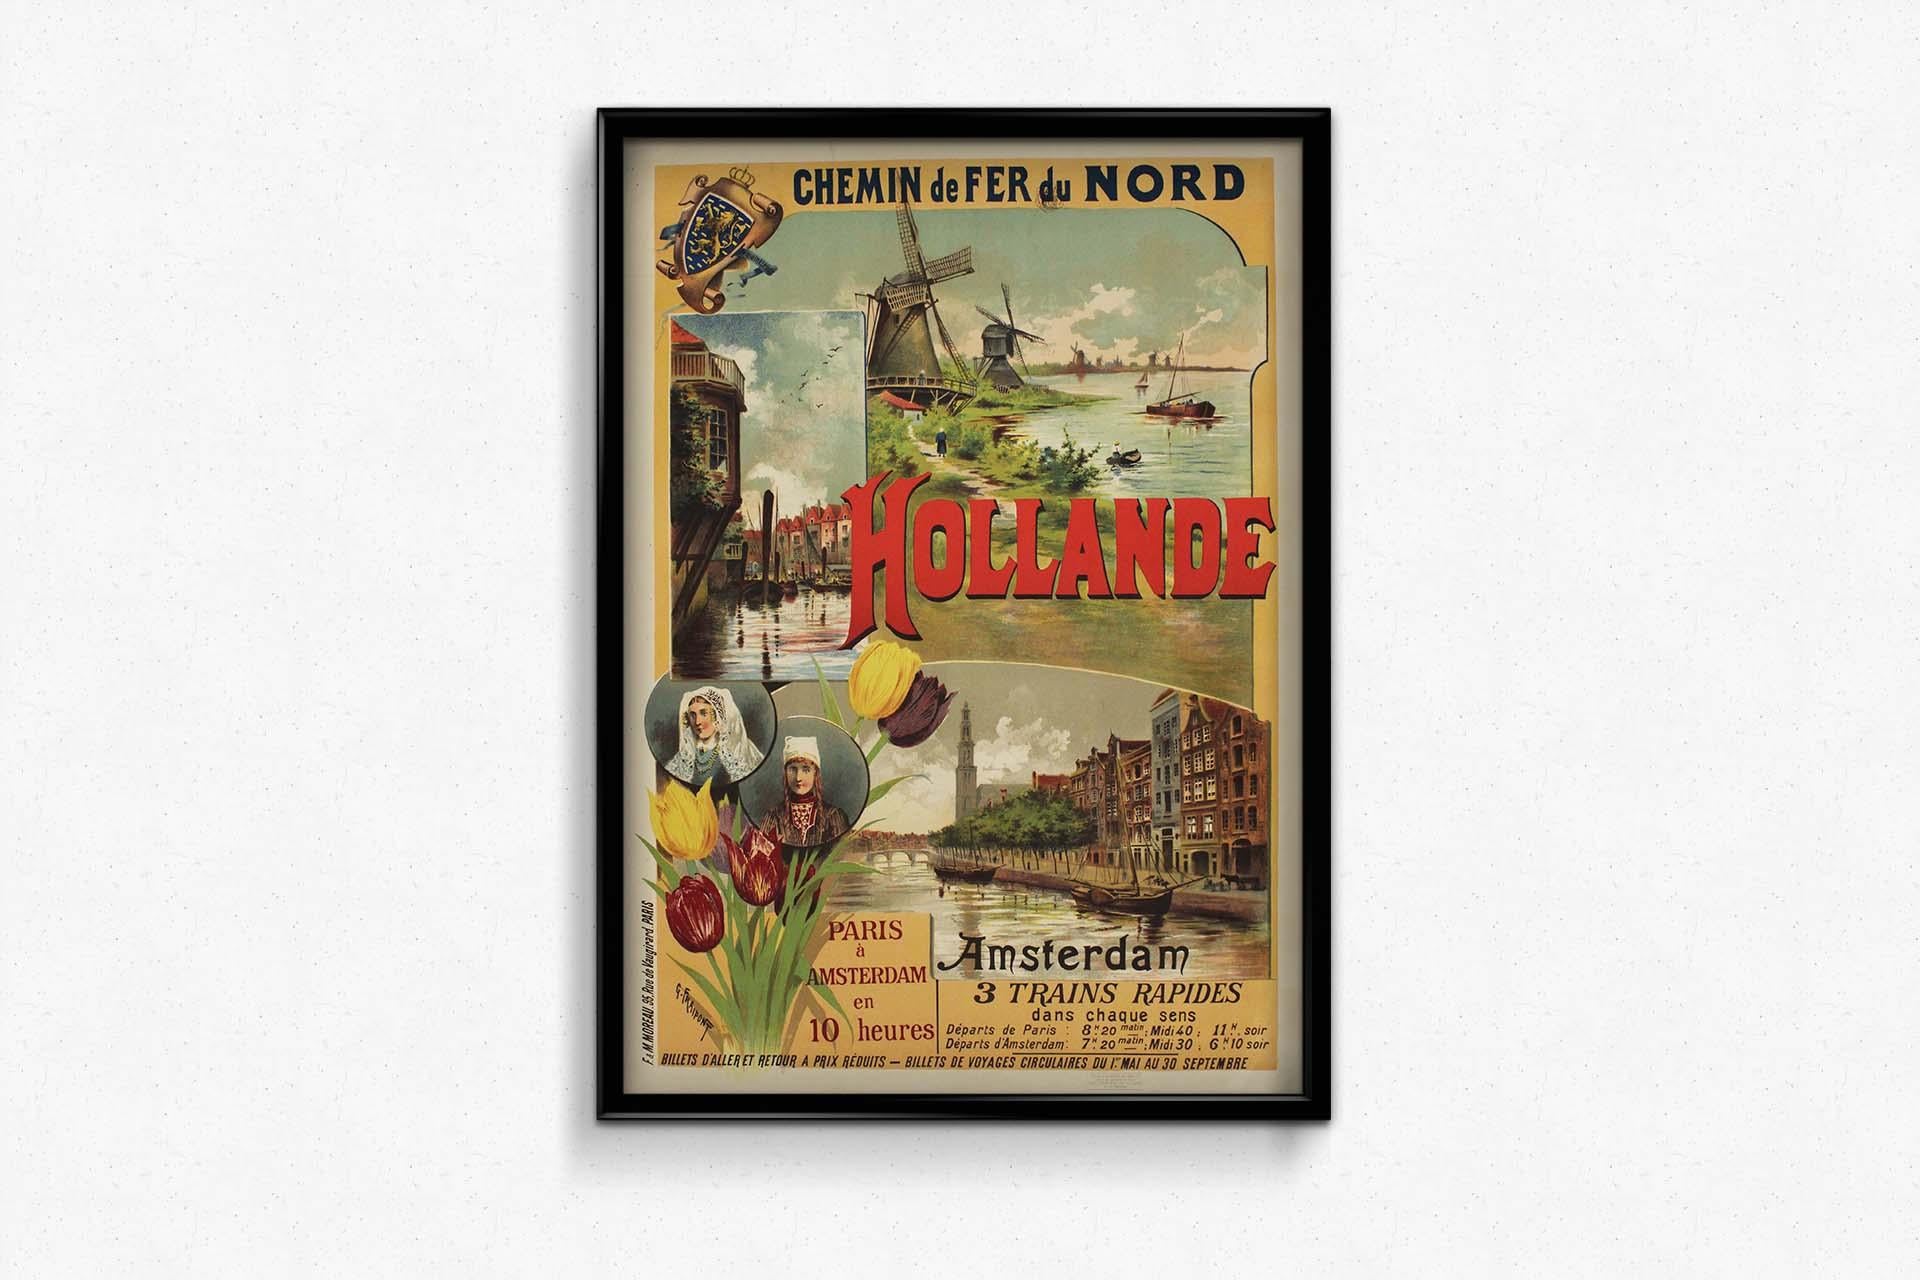 Crafted in 1895 by the talented artist Gustave Fraipont, the original poster for 